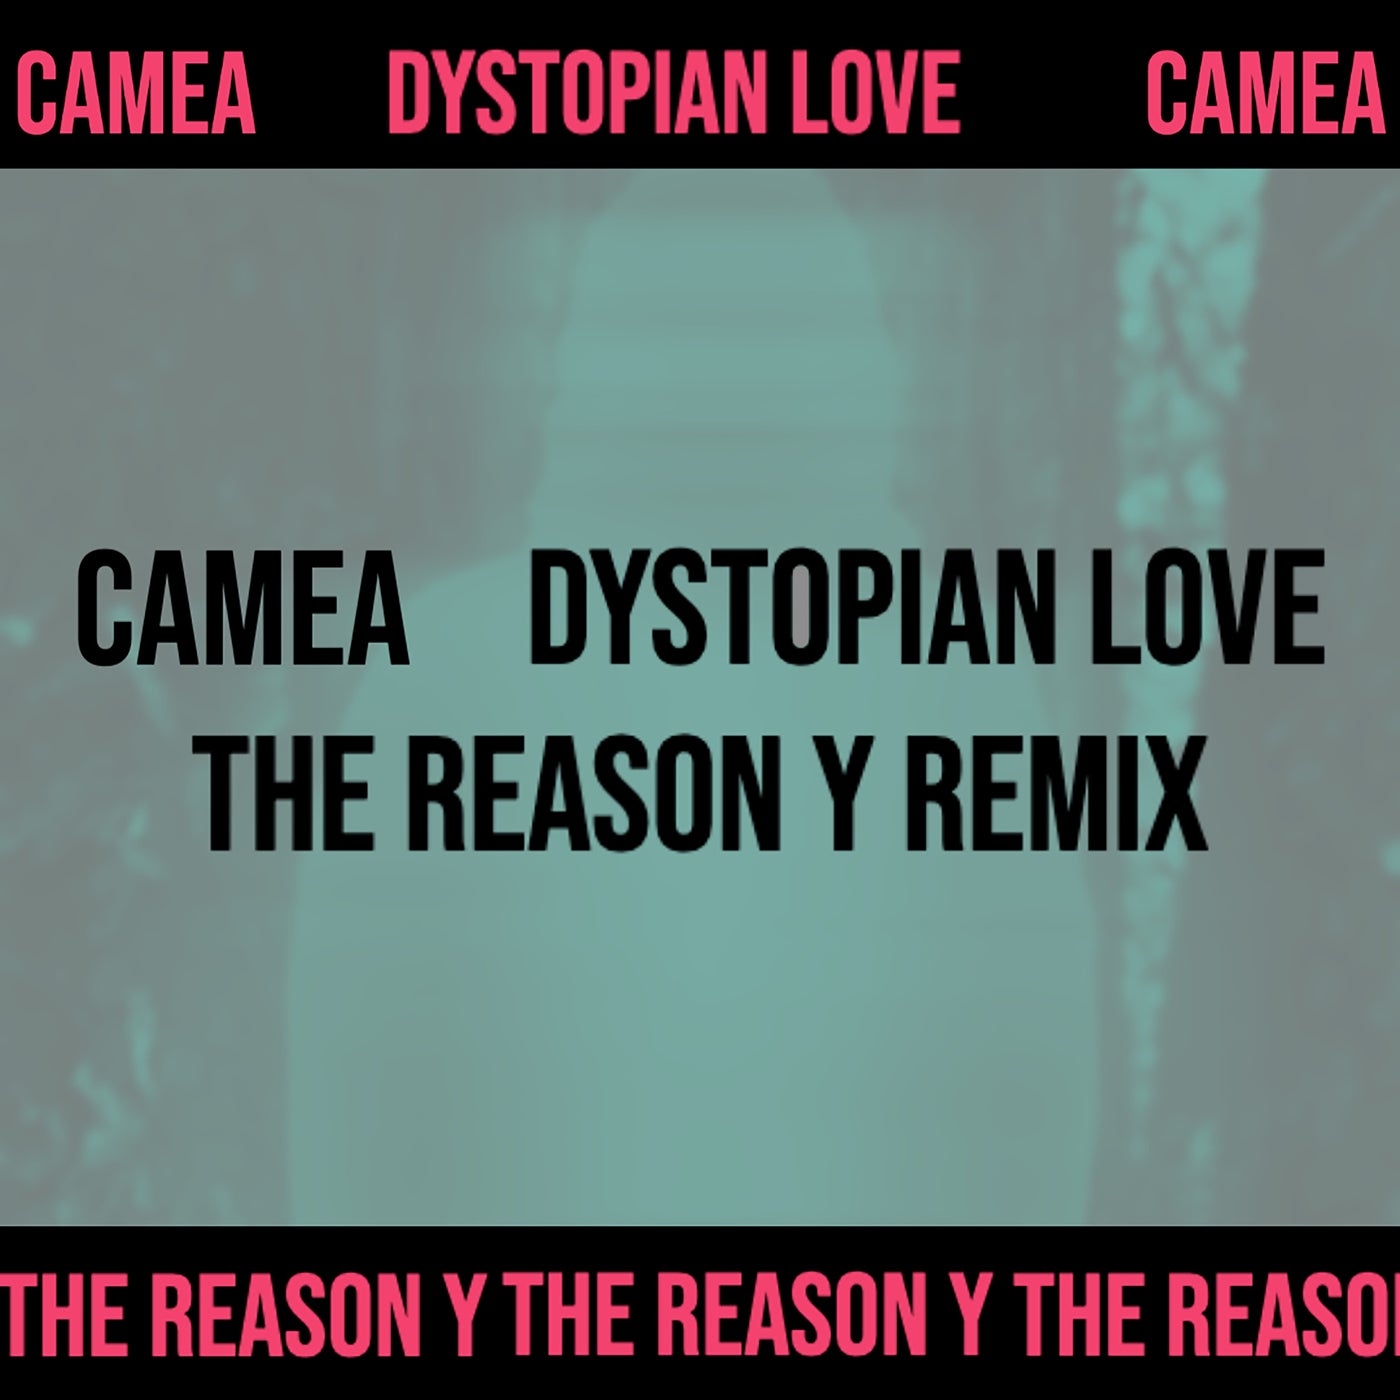 image cover: Camea - Dystopian Love (The Reason Y Remix) / NVR009